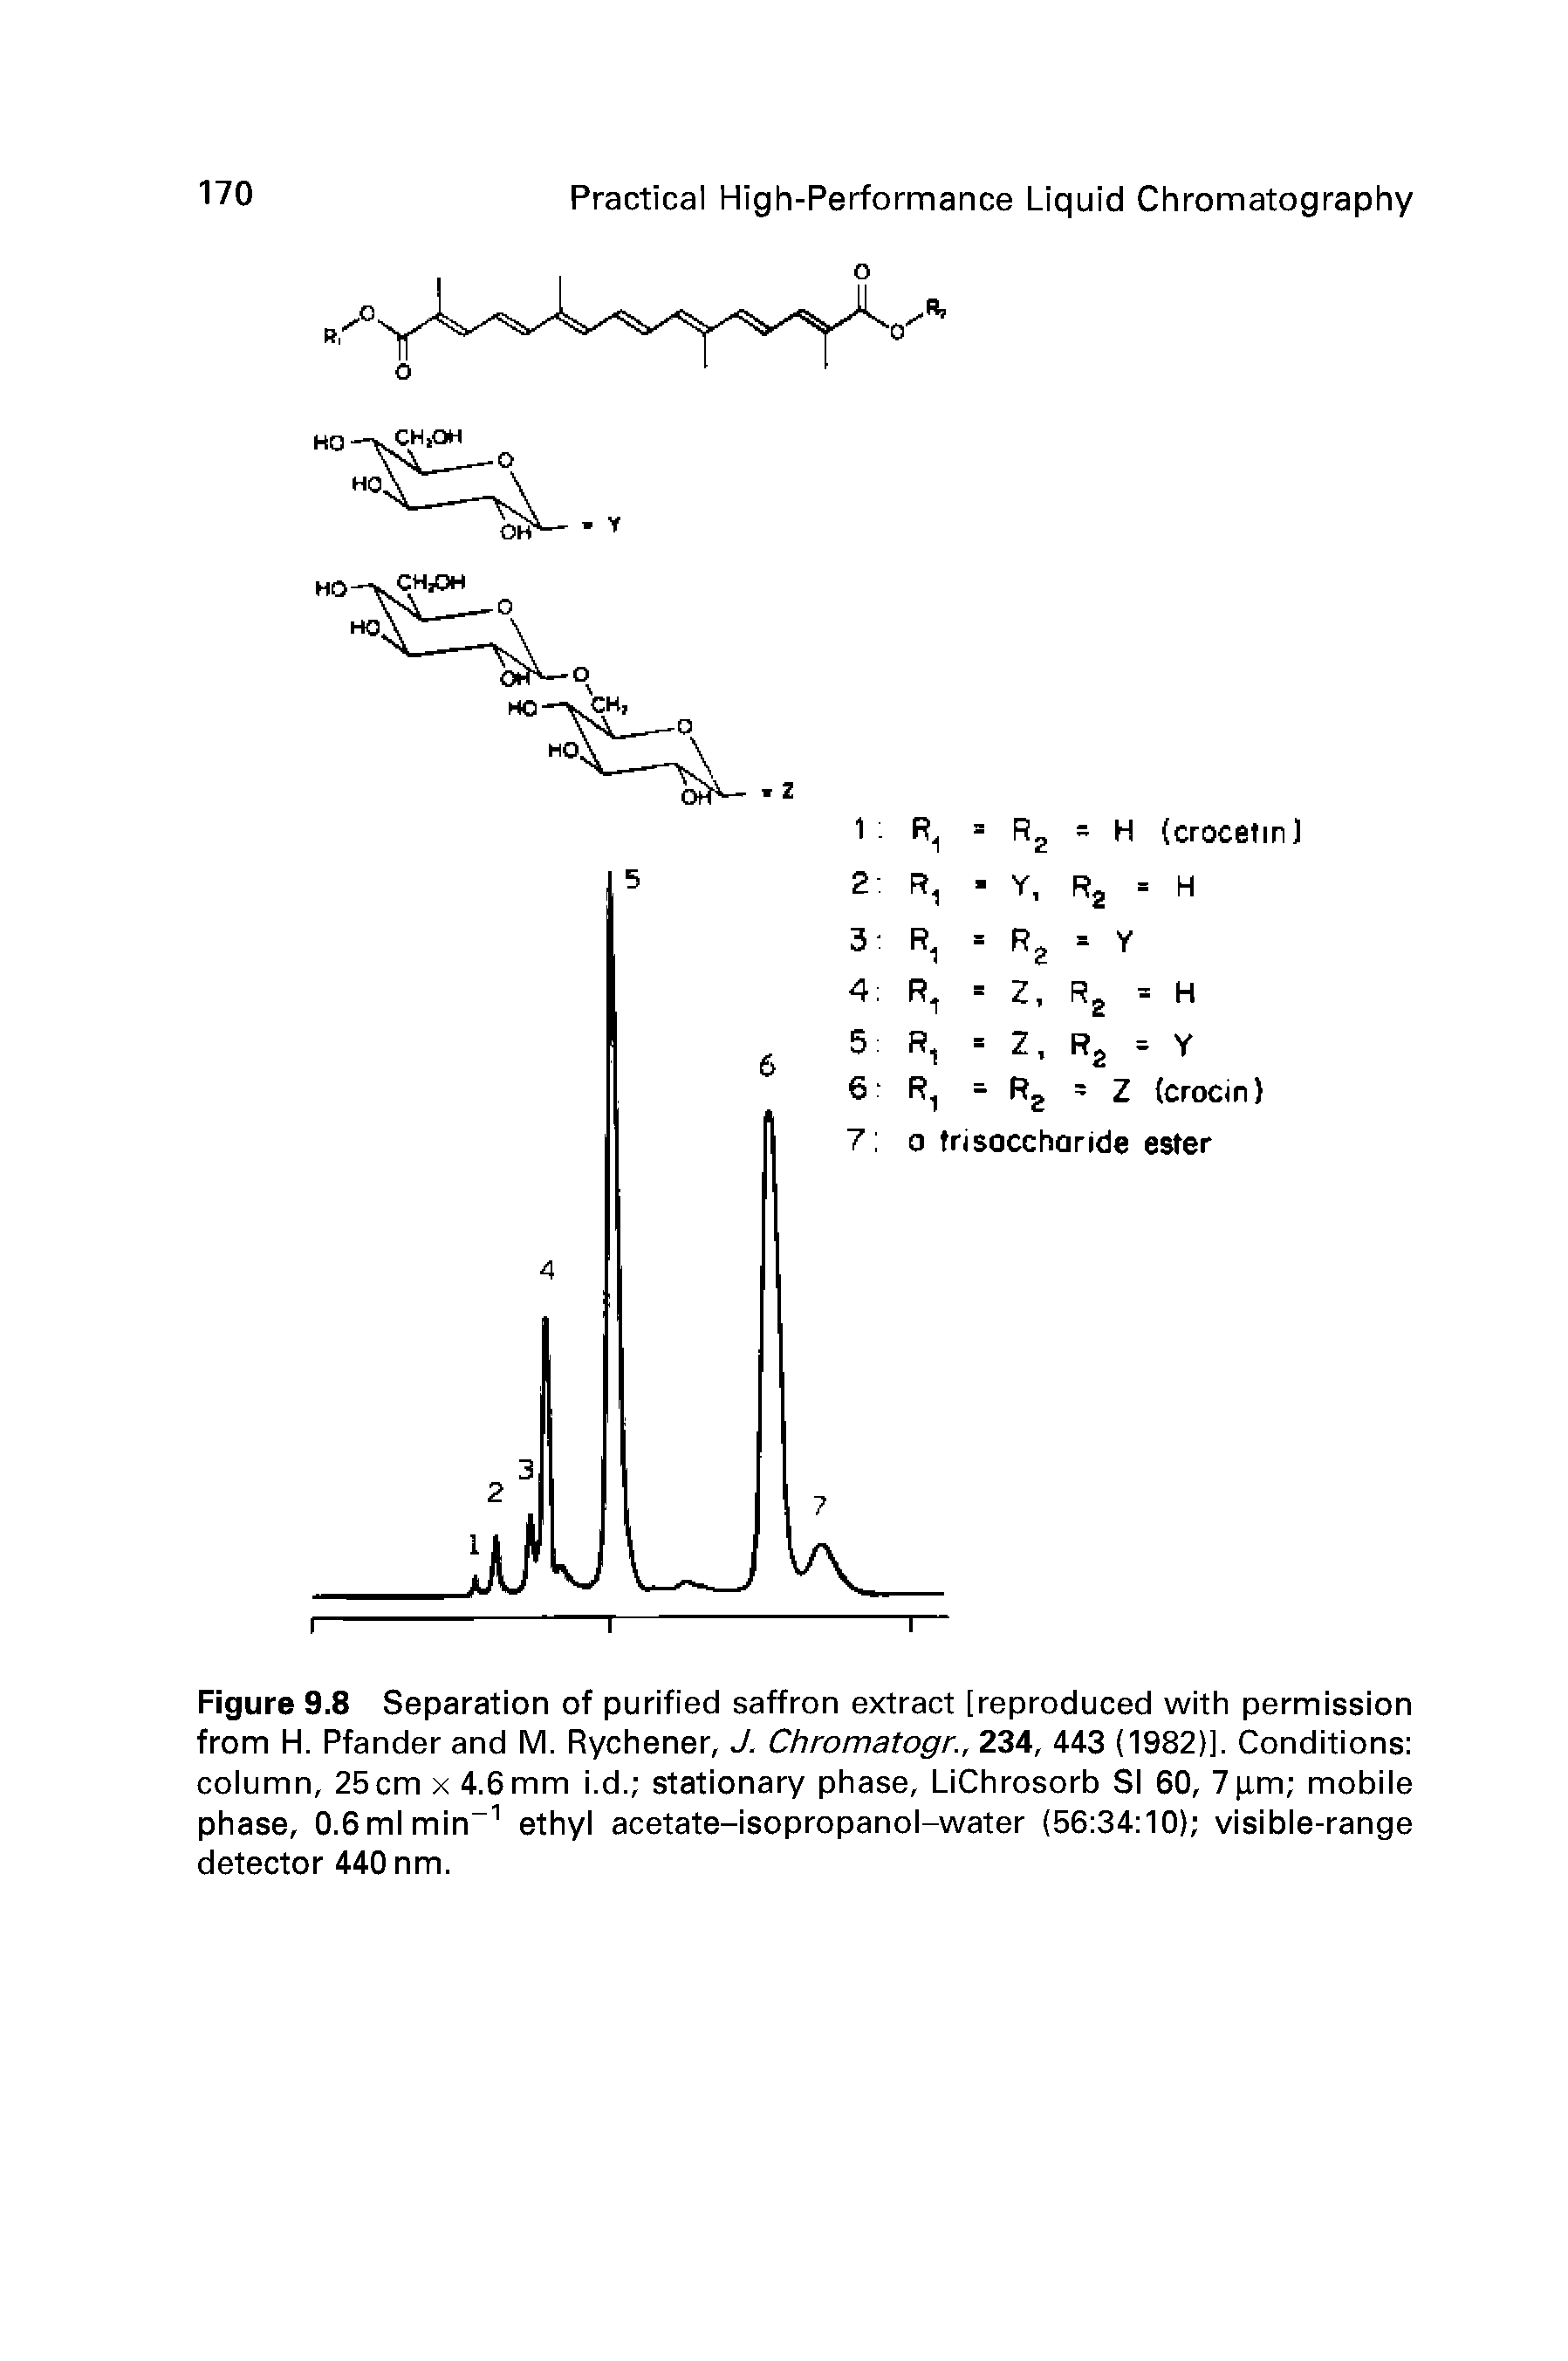 Figure 9.8 Separation of purified saffron extract [reproduced with permission from H. Pfander and M. Rychener, J. Chromatogr., 234, 443 (1982)]. Conditions column, 25cm x 4.6mm i.d. stationary phase, LiChrosorb SI 60, 7ixm mobile phase, 0.6ml min ethyl acetate-isopropanol-water (56 34 10) visible-range detector 440 nm.